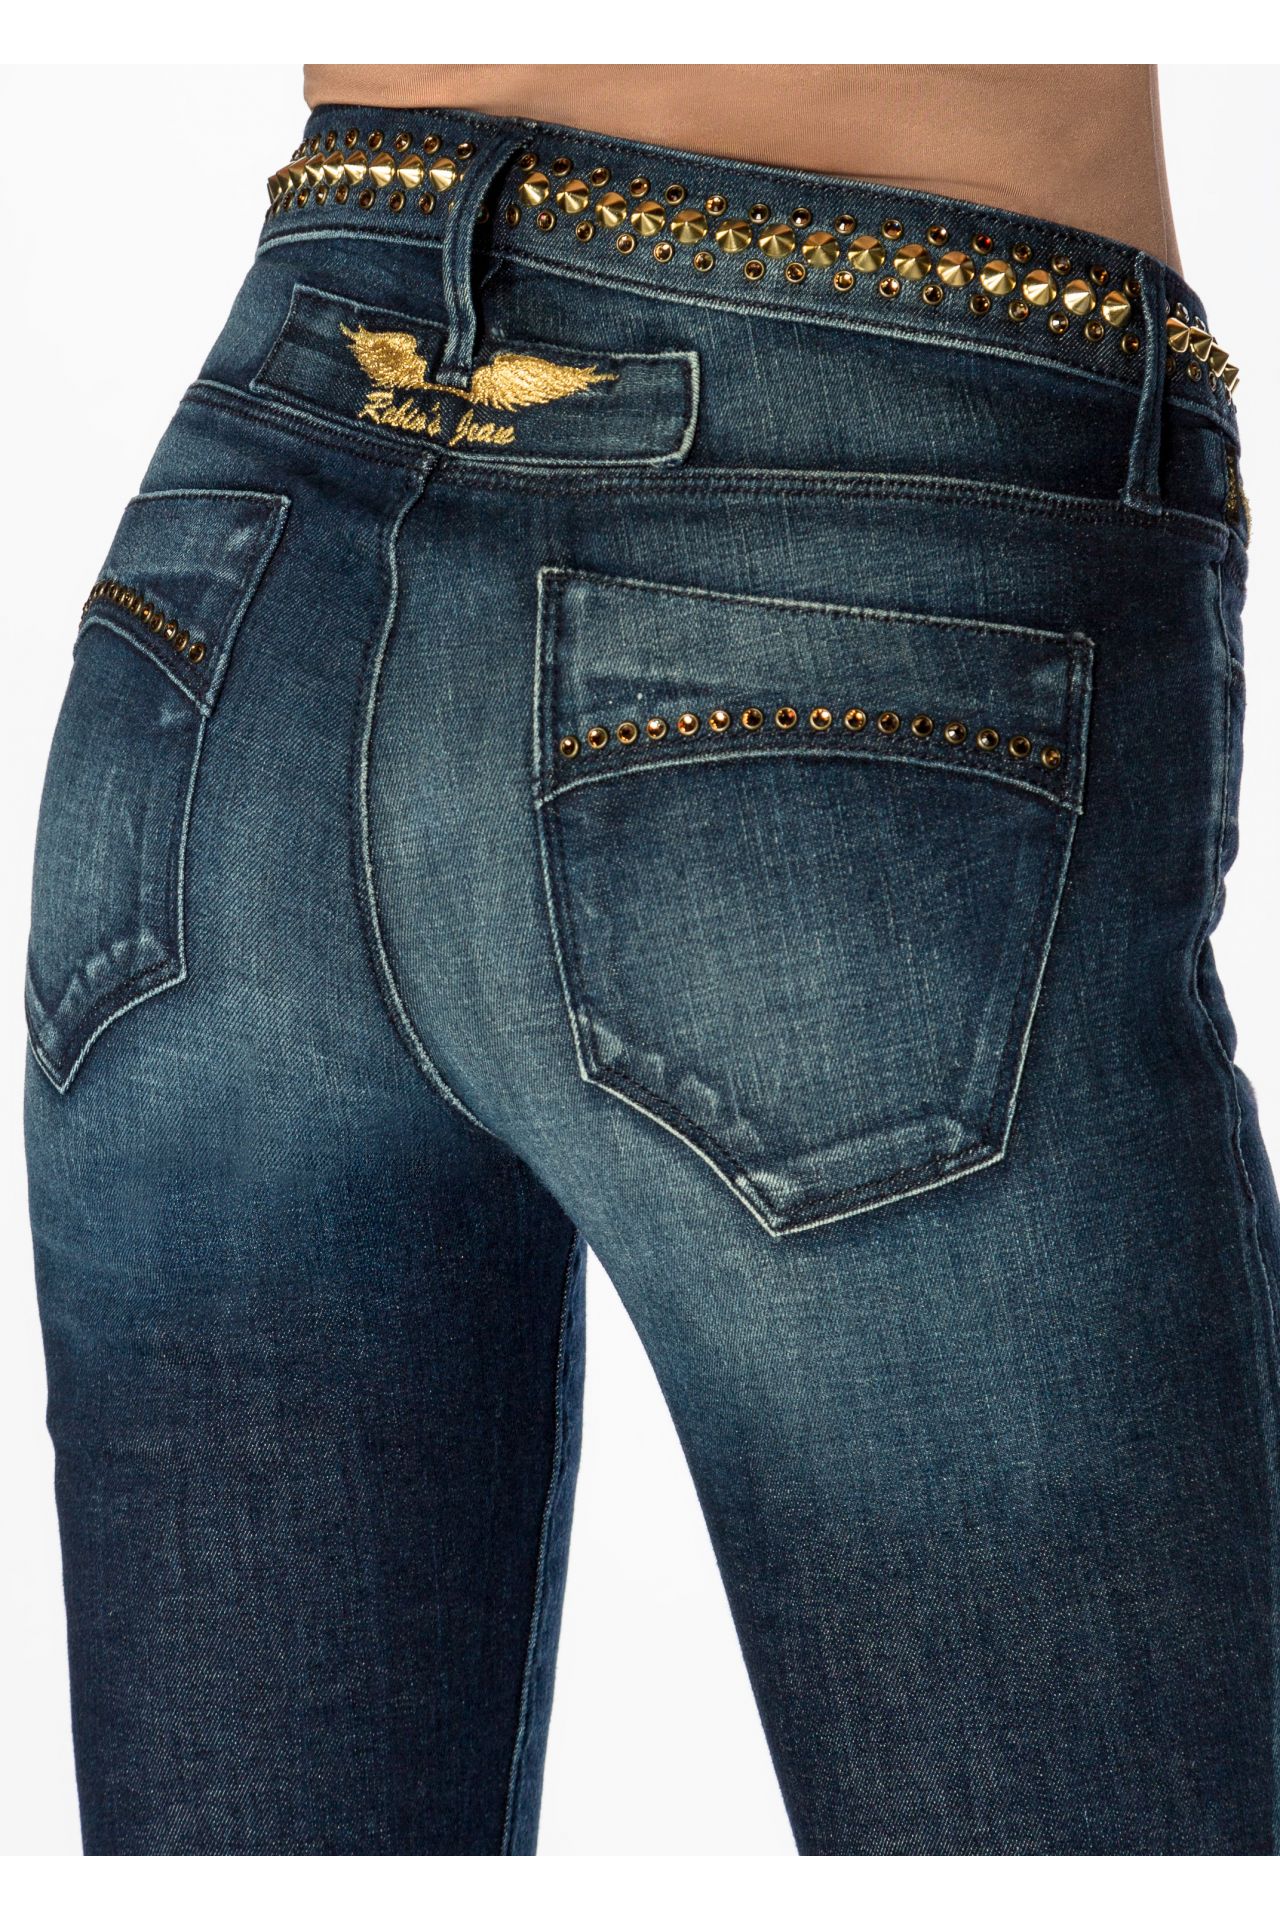 MID RISE SKINNY JEANS IN DARK WASH WITH STUDS AND SW